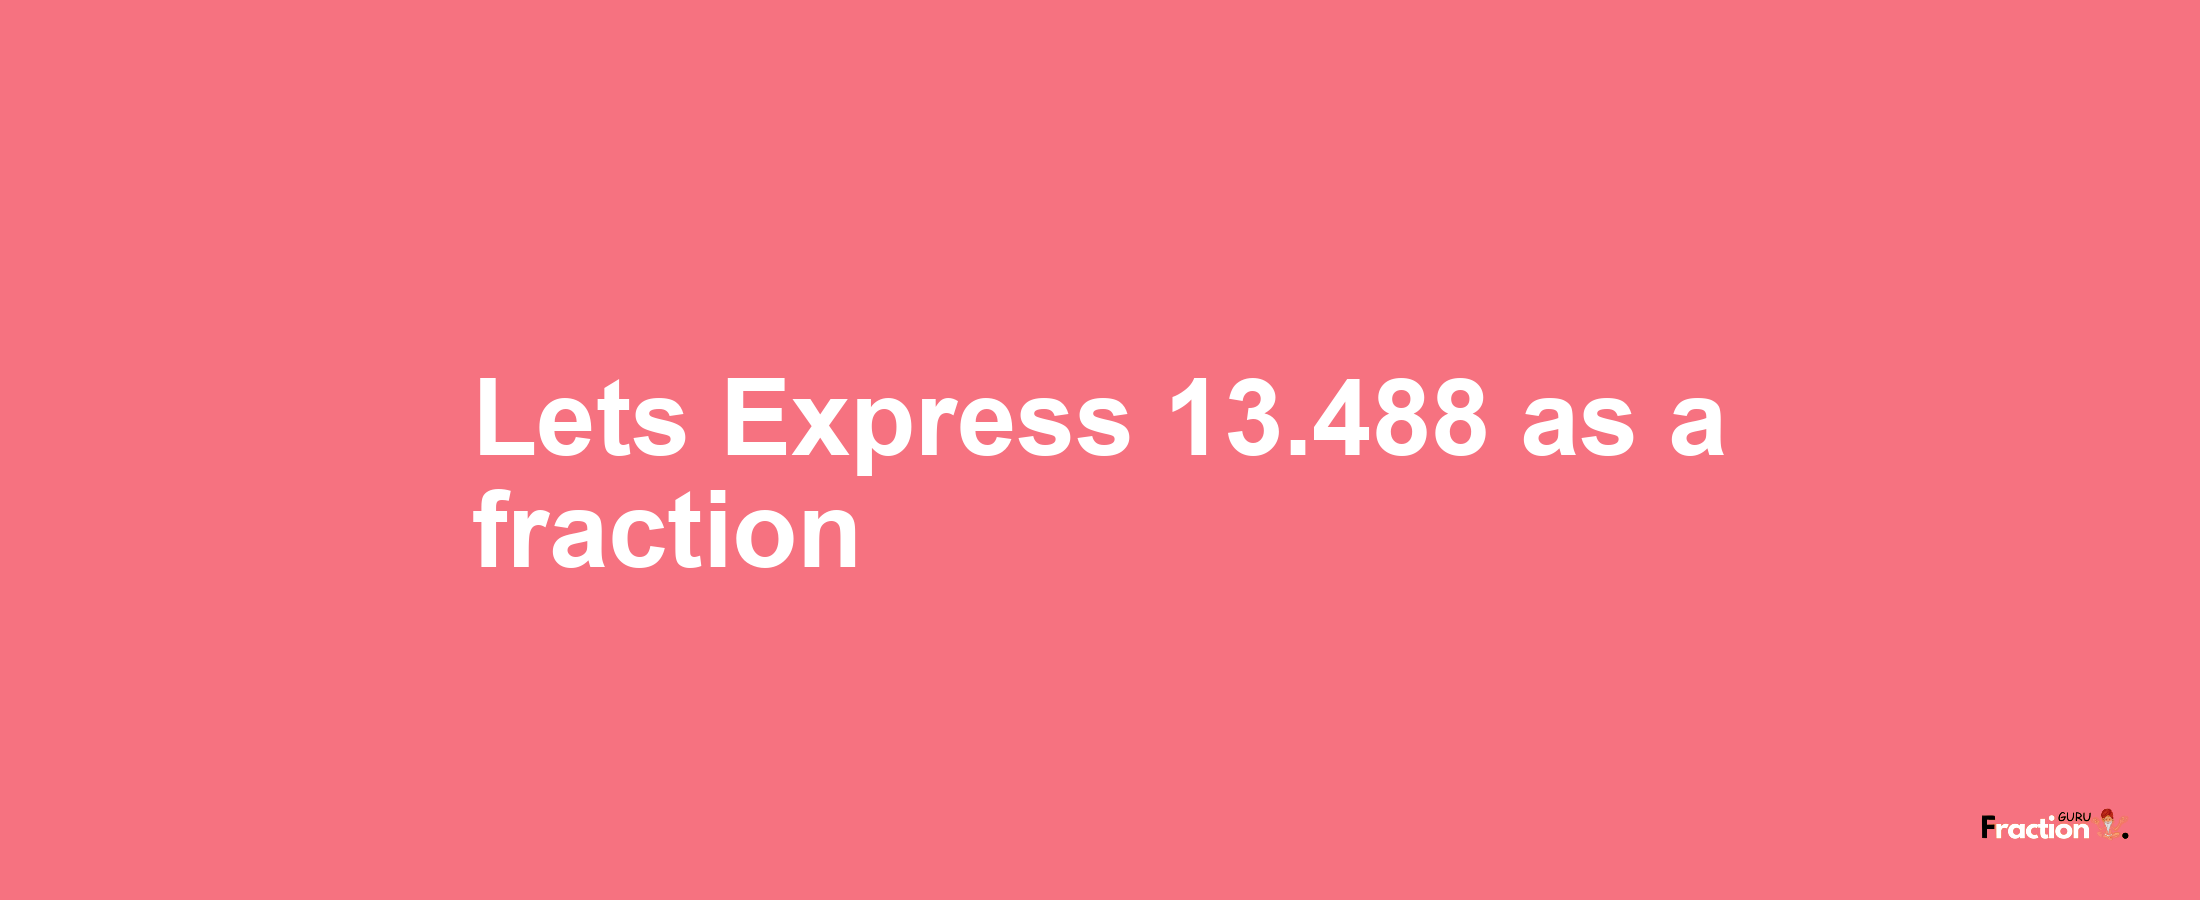 Lets Express 13.488 as afraction